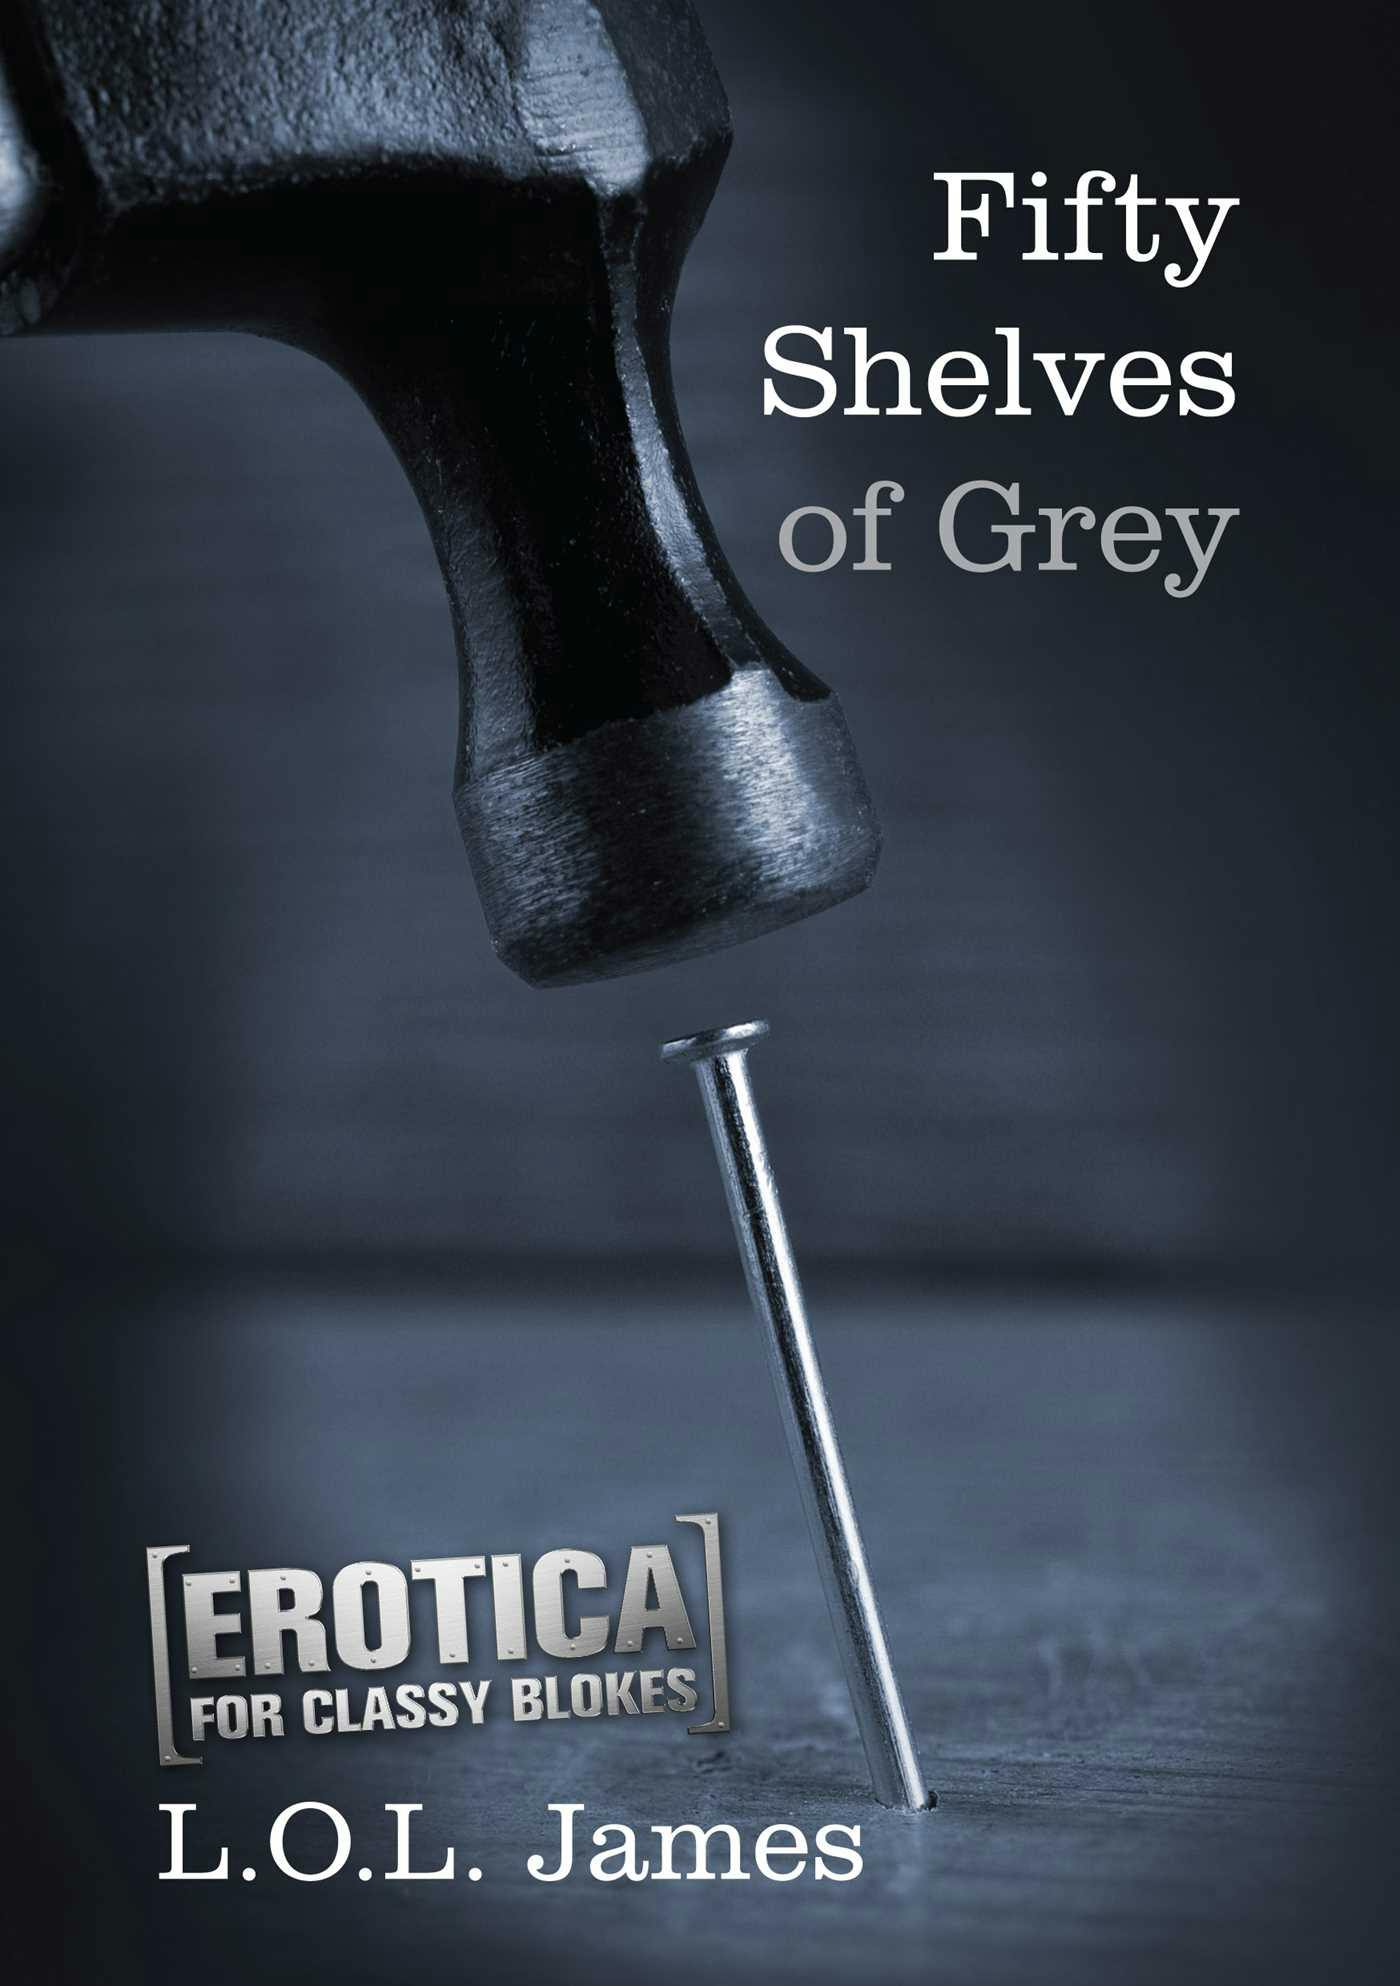 Fifty Shelves of Grey: Erotica for classy blokes - L.O.L. James